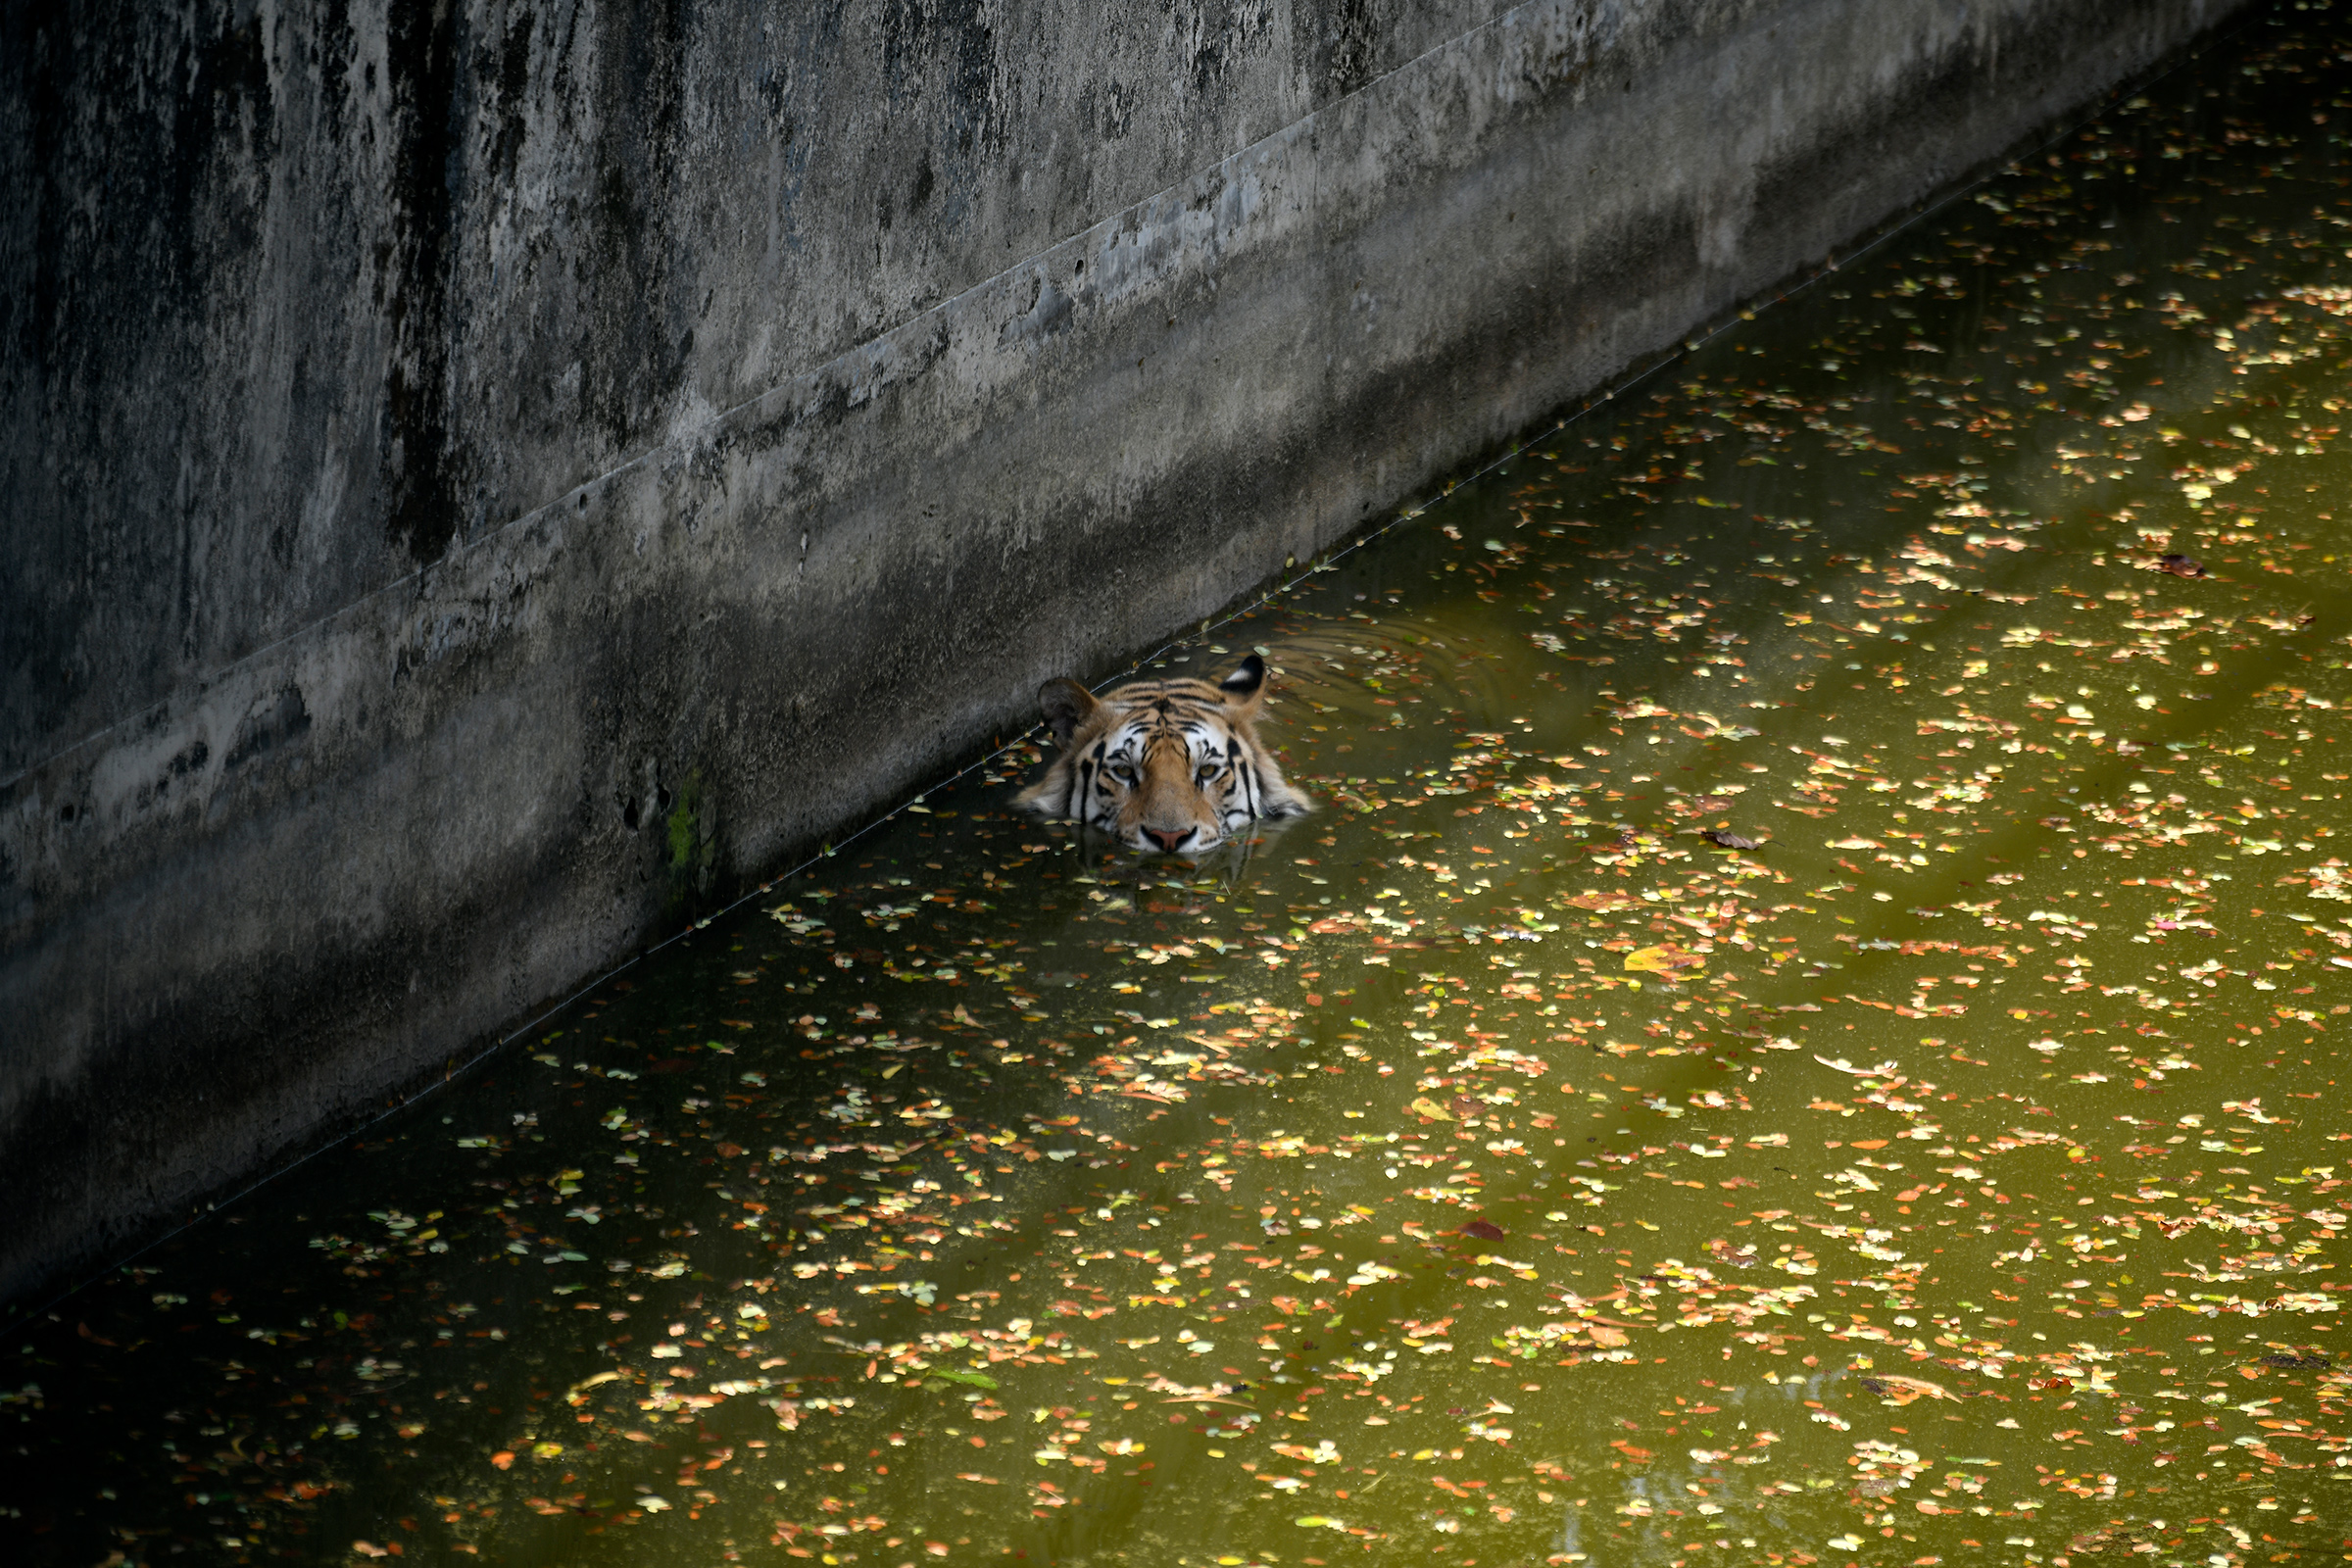 A Royal Bengal tiger reacts to the camera as he swims during a heatwave at Bangladesh national zoo in Dhaka on April 16. Dhaka saw the maximum temperature rise to 40.4 degrees Celsius on Saturday, making it the city's hottest day in 58 years. (Syed Mahamudur Rahman—NurPhoto/Reuters)